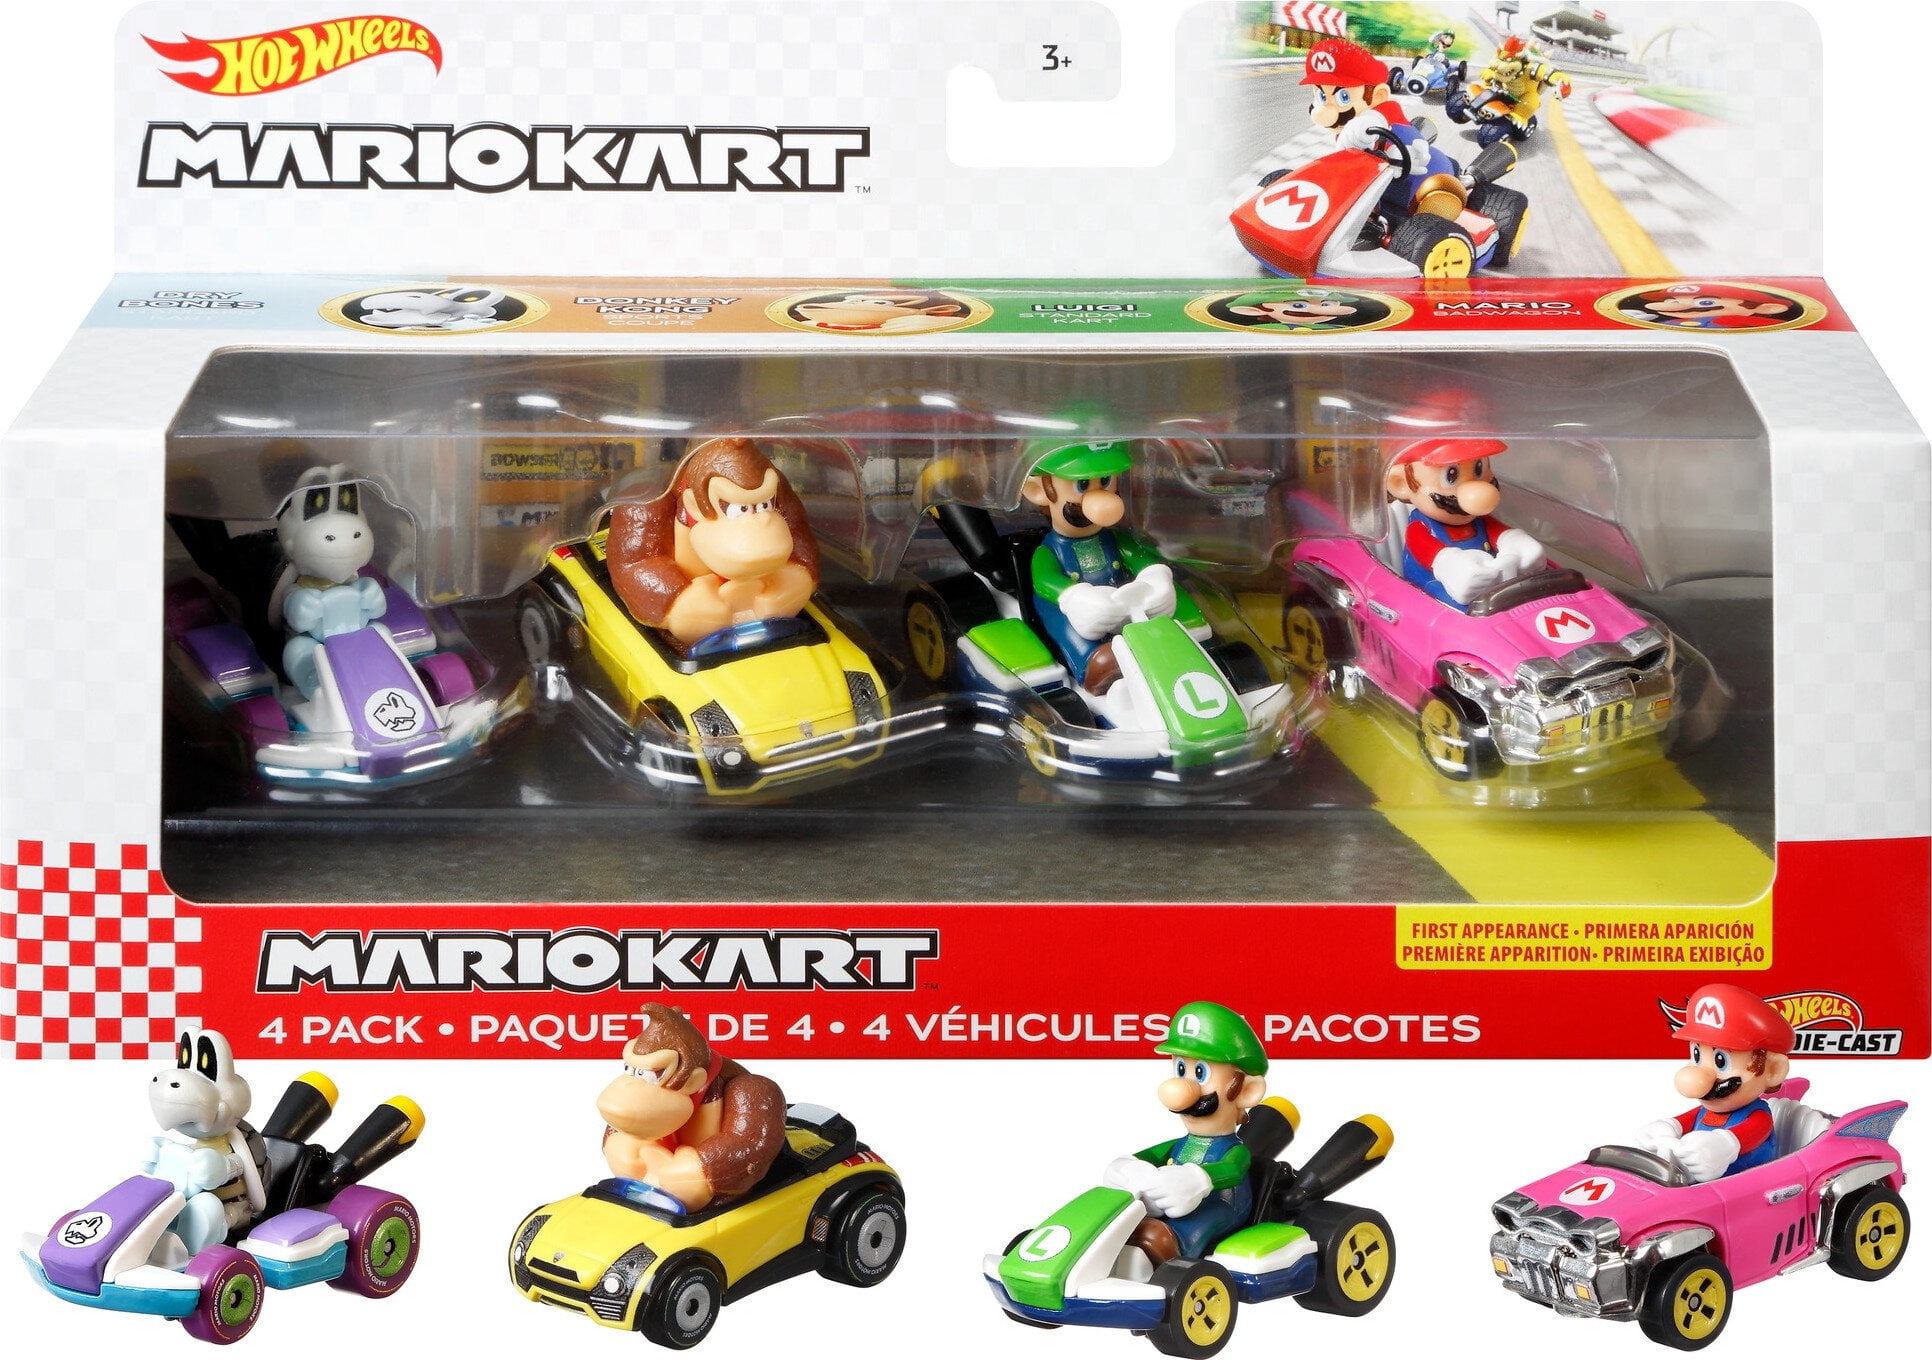 Hot Wheels Mario Kart Set of 4 Toy Character Vehicles, Includes 1